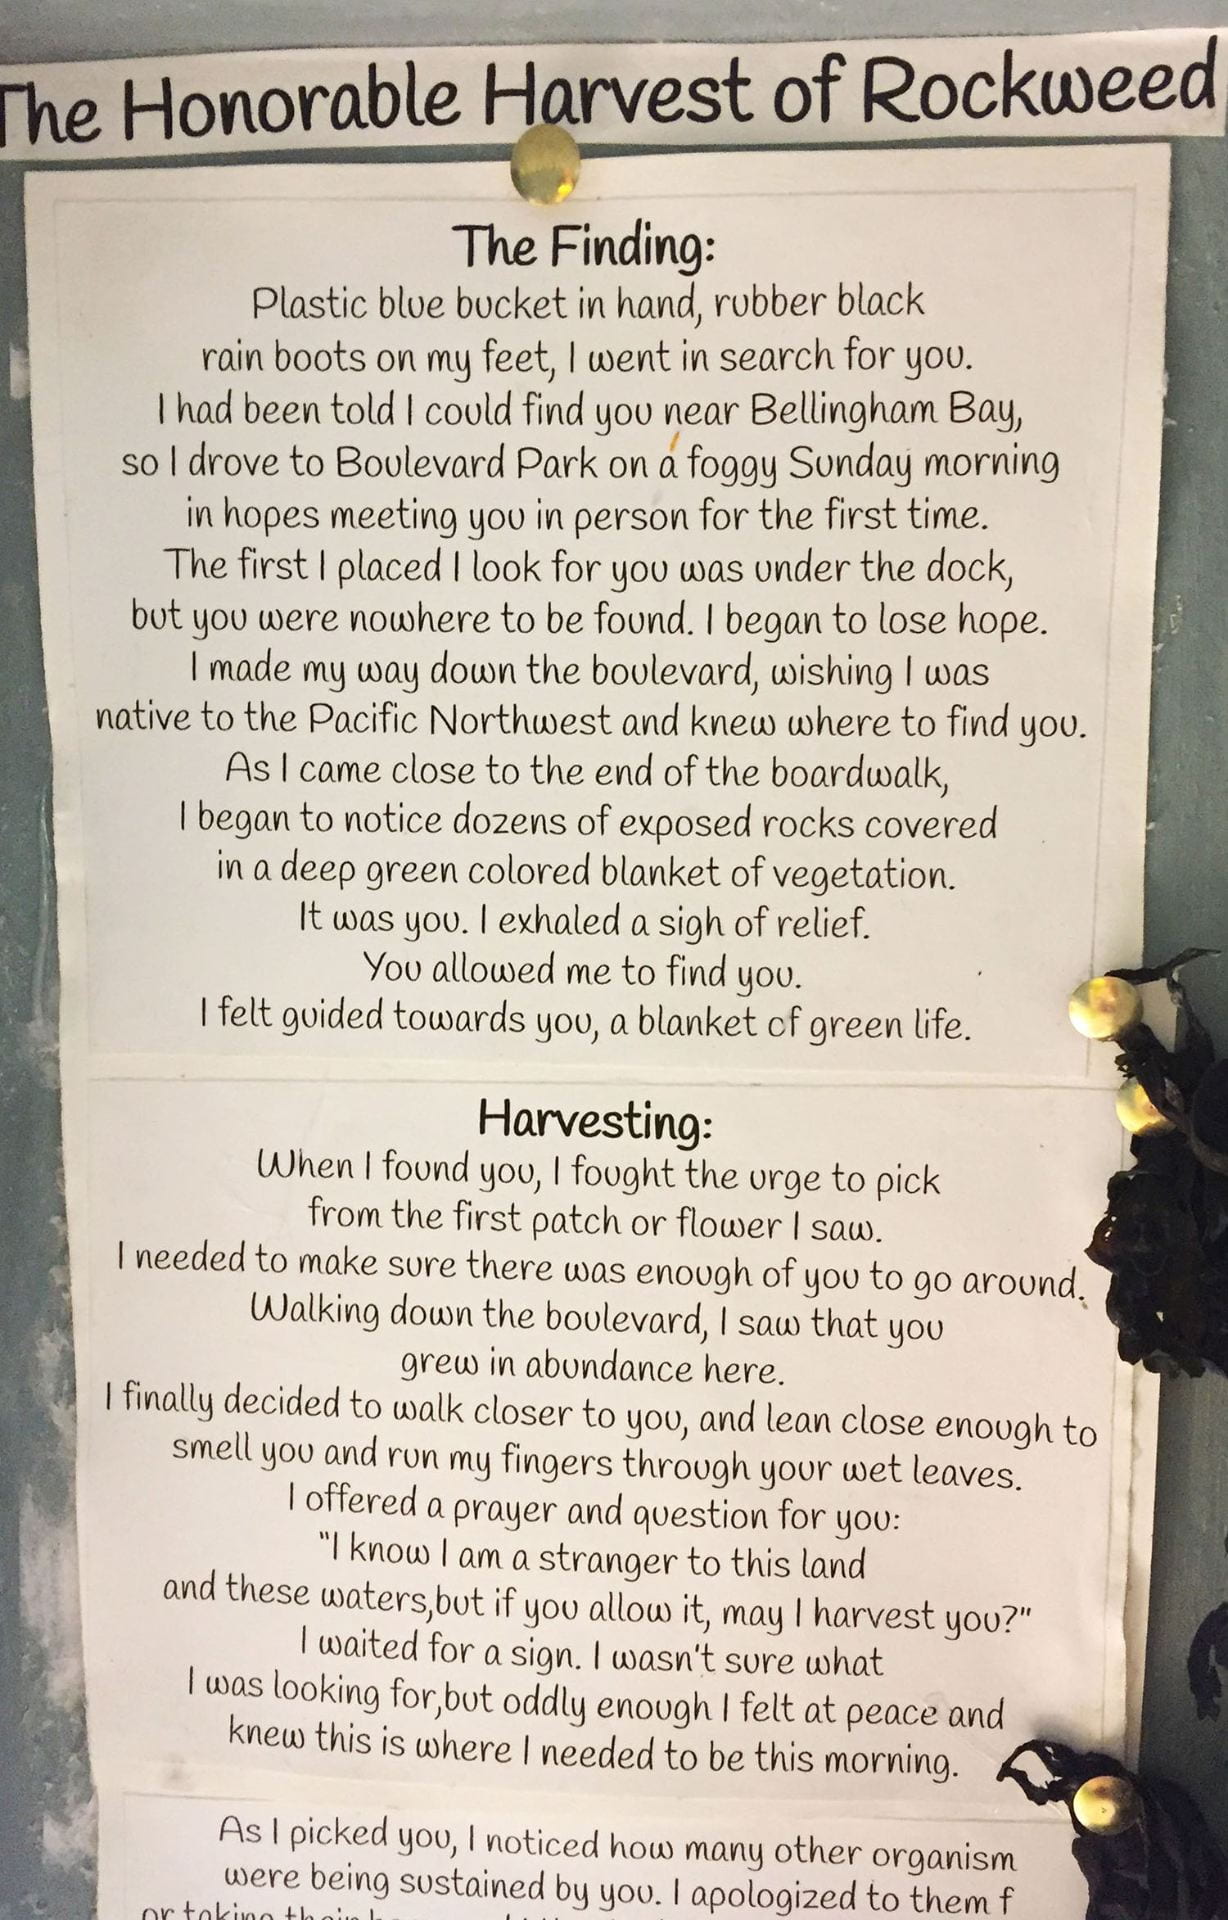 close-up of a paper titled "The Honorable Harvest of Rockweed" describing the finding and harvesting of rockweed